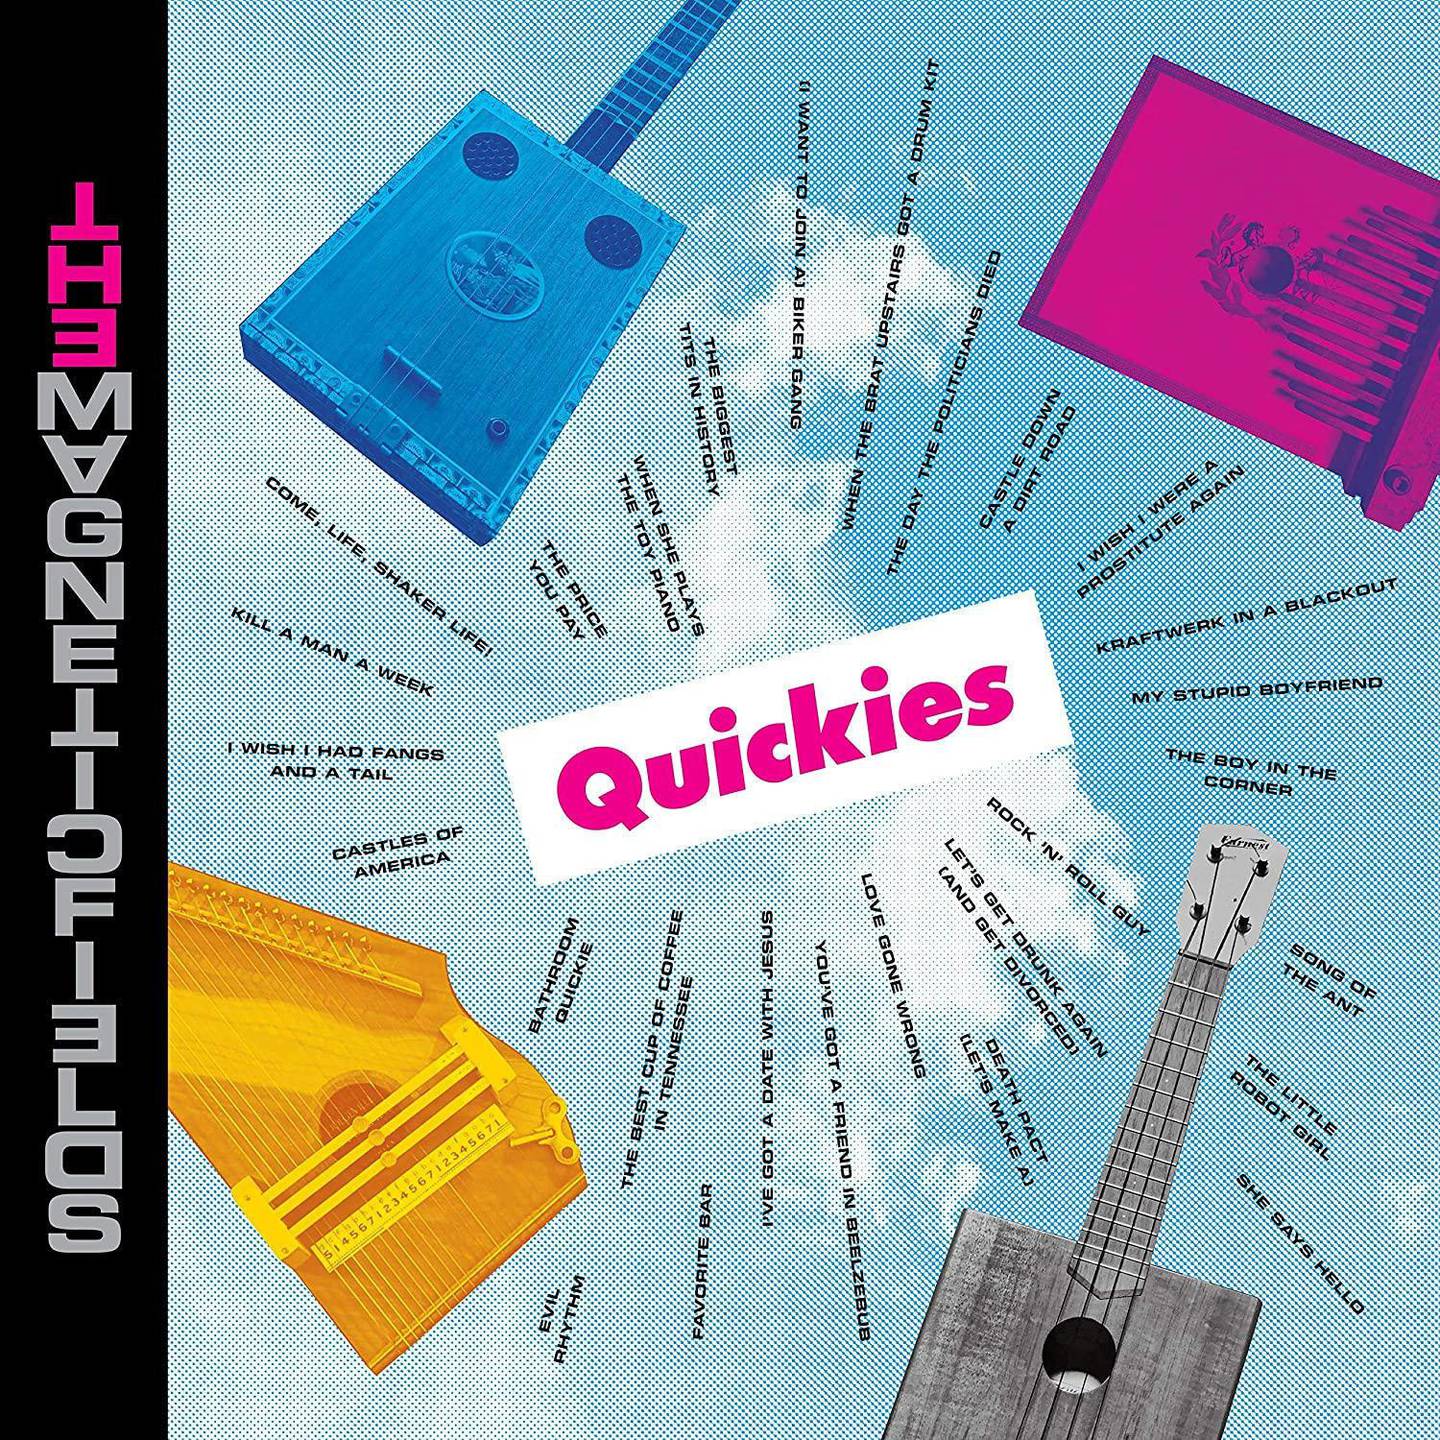 The Magnetic Fields
«Quickies»
Nonesuch